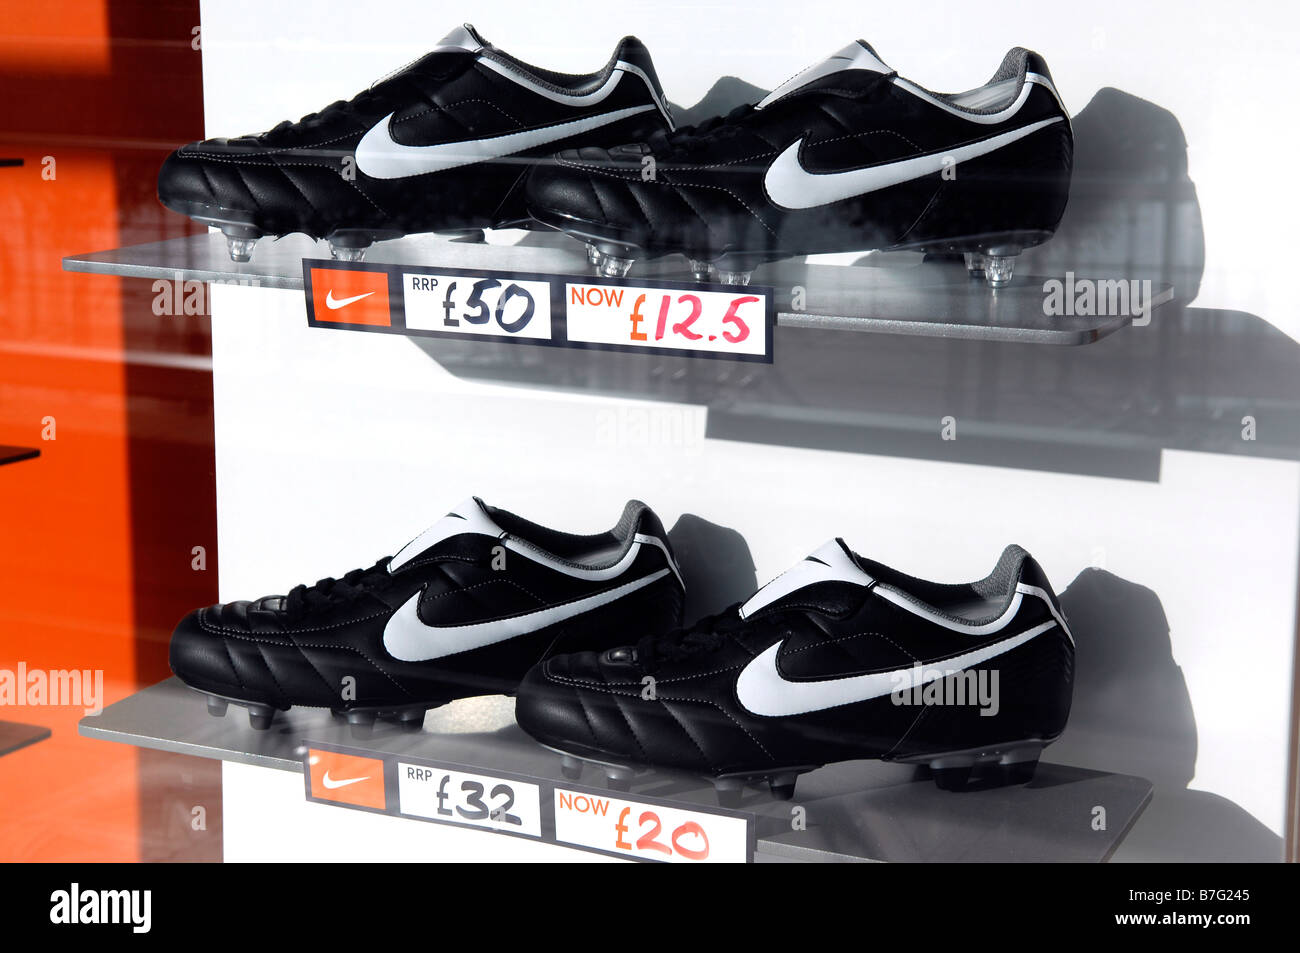 nike footwear football boots soccer shoes window display reduced american company fashion retail shop store niketown Stock Photo